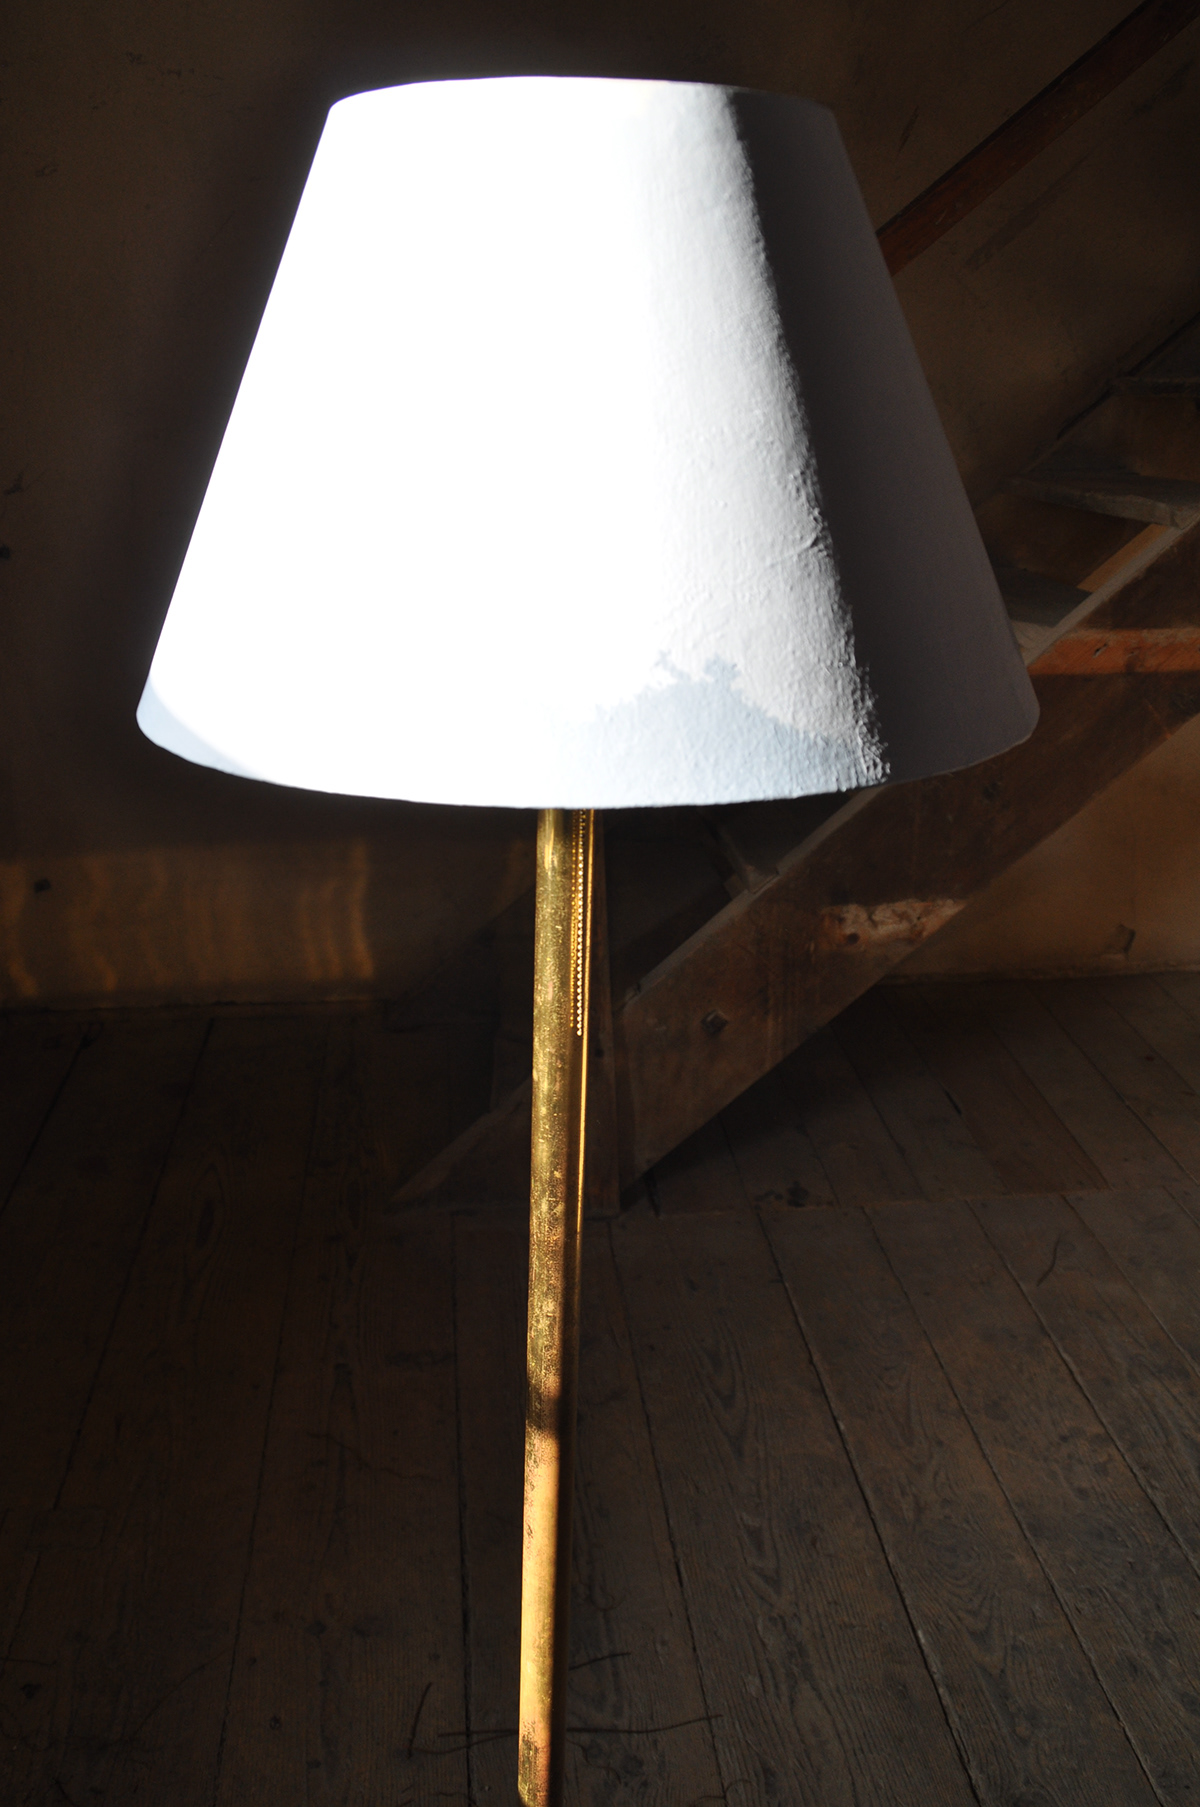 Lamp light floor lamp Painted canvass canvas electric furniture japan plue brass leg bulb lighting exclusive